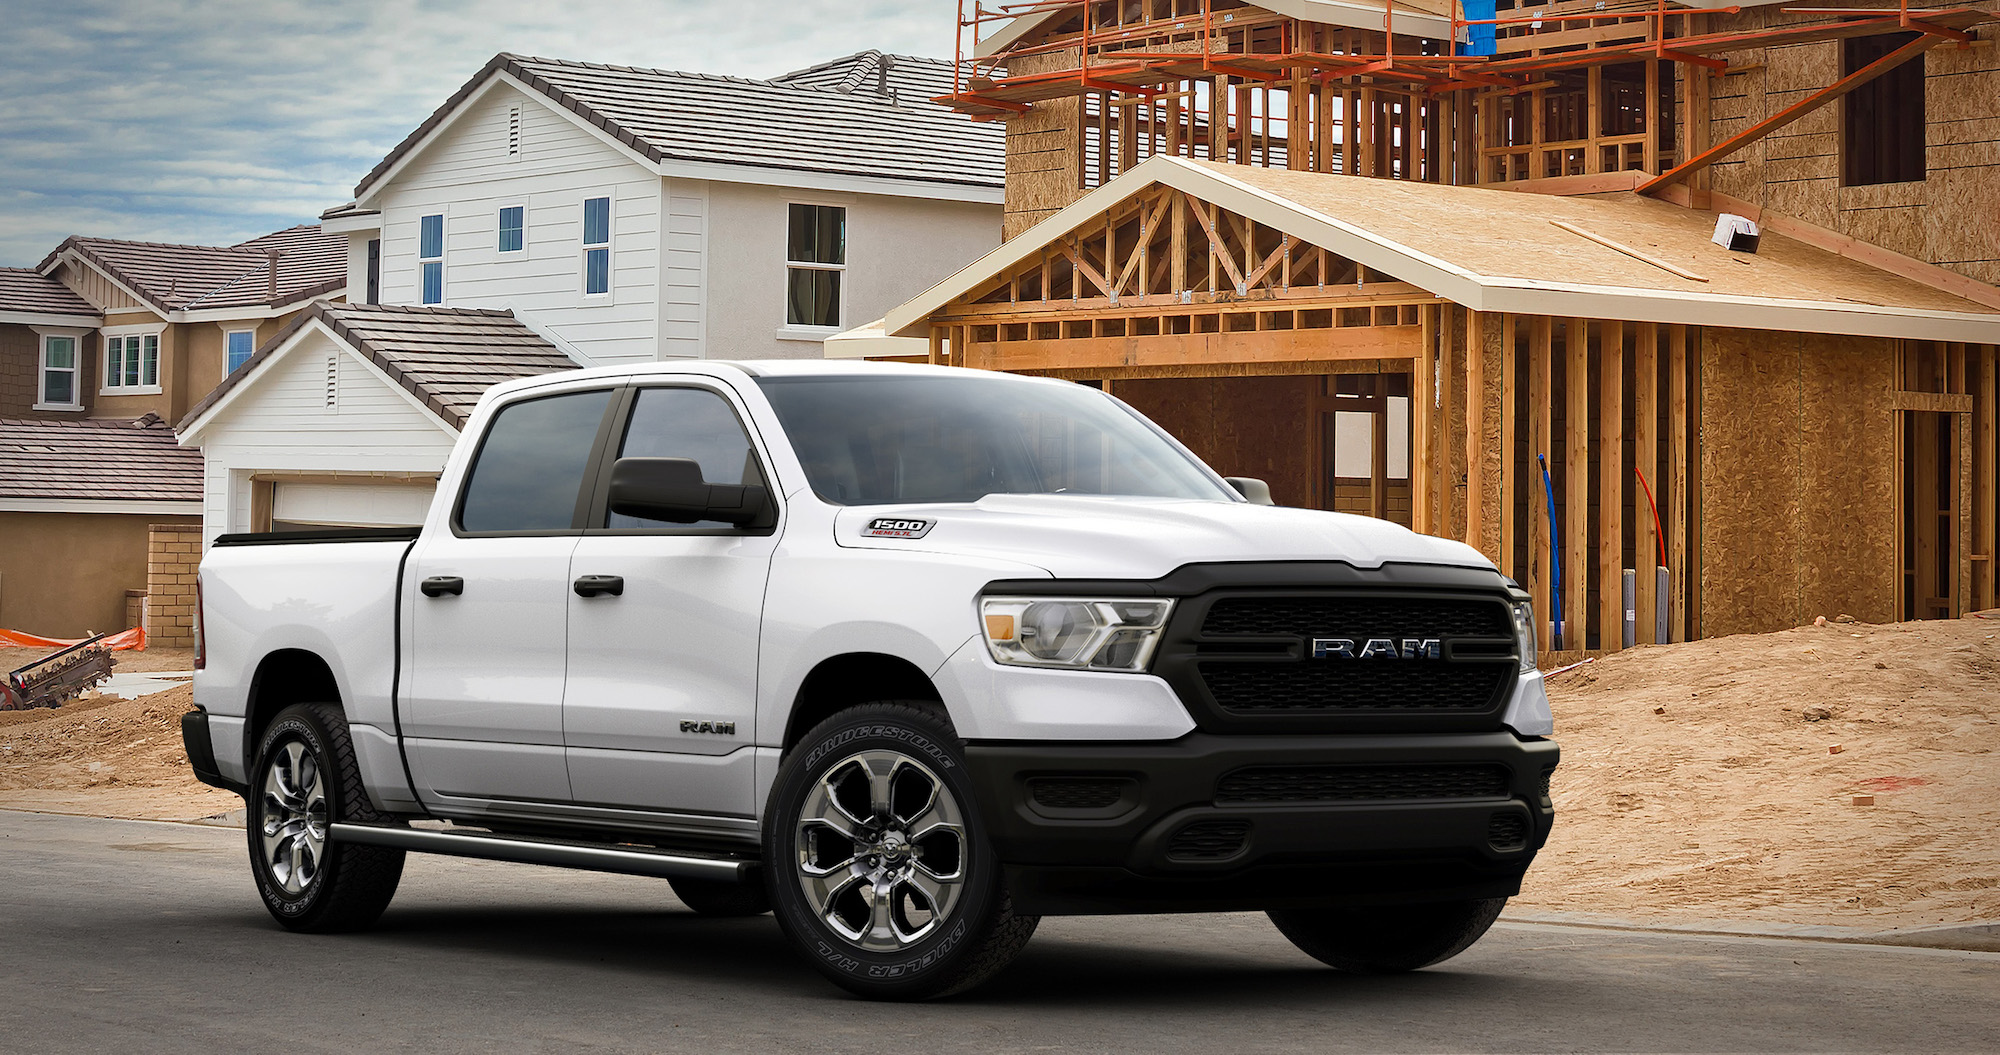 A white 2021 Ram 1500 Tradesman HFE EcoDiesel parked on the street outside a house under construction